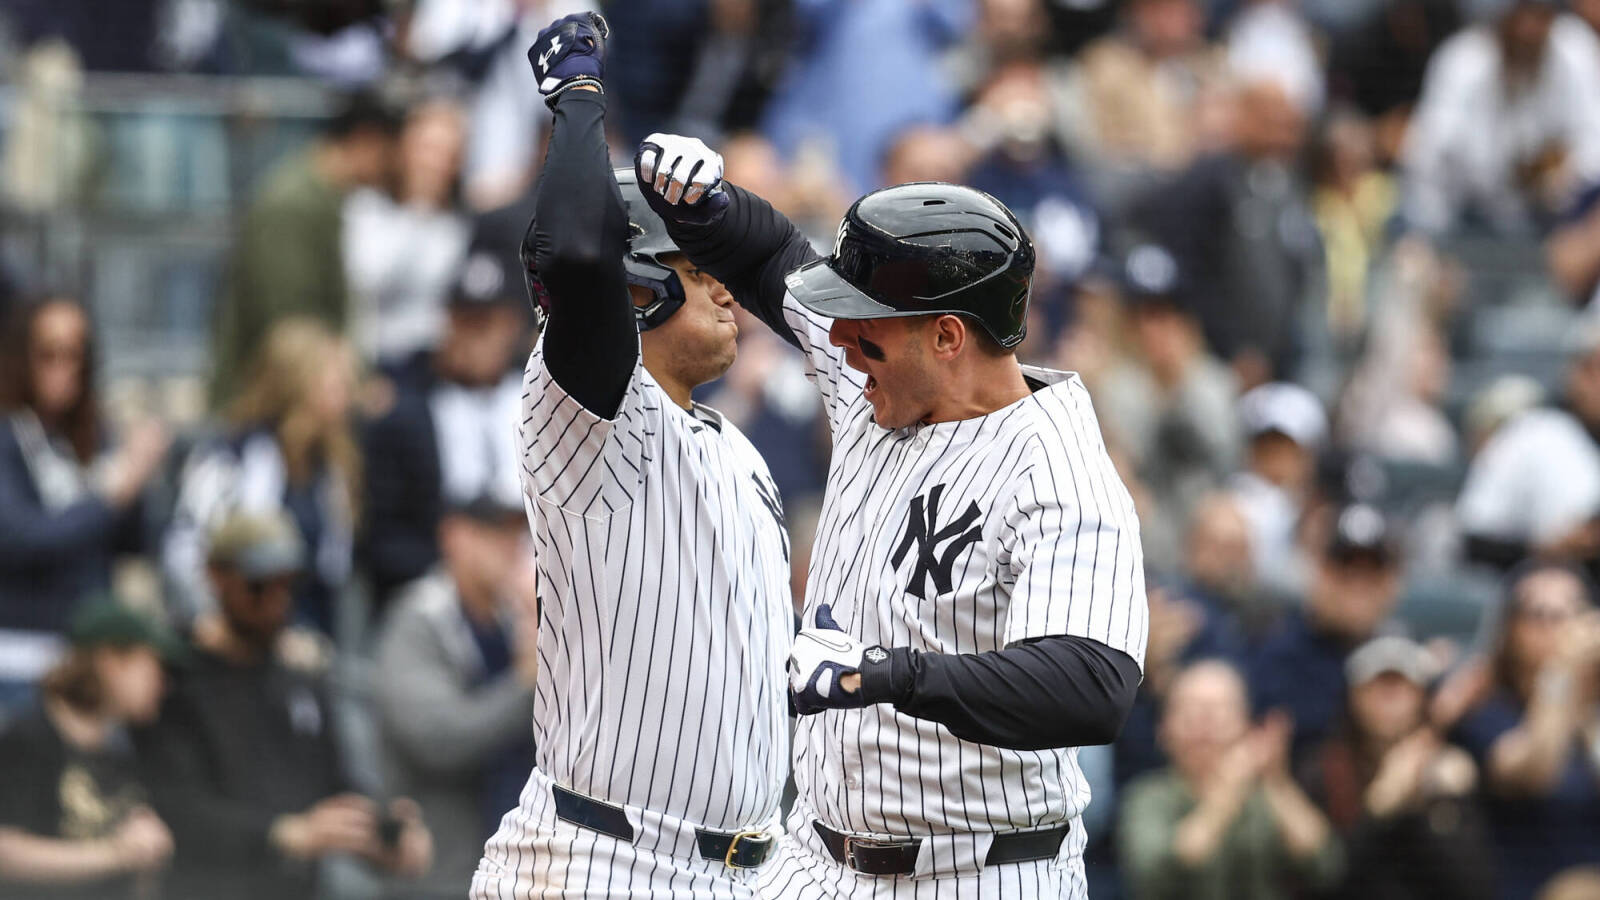 Watch: Yankees' Anthony Rizzo hits three-run homer against Tigers